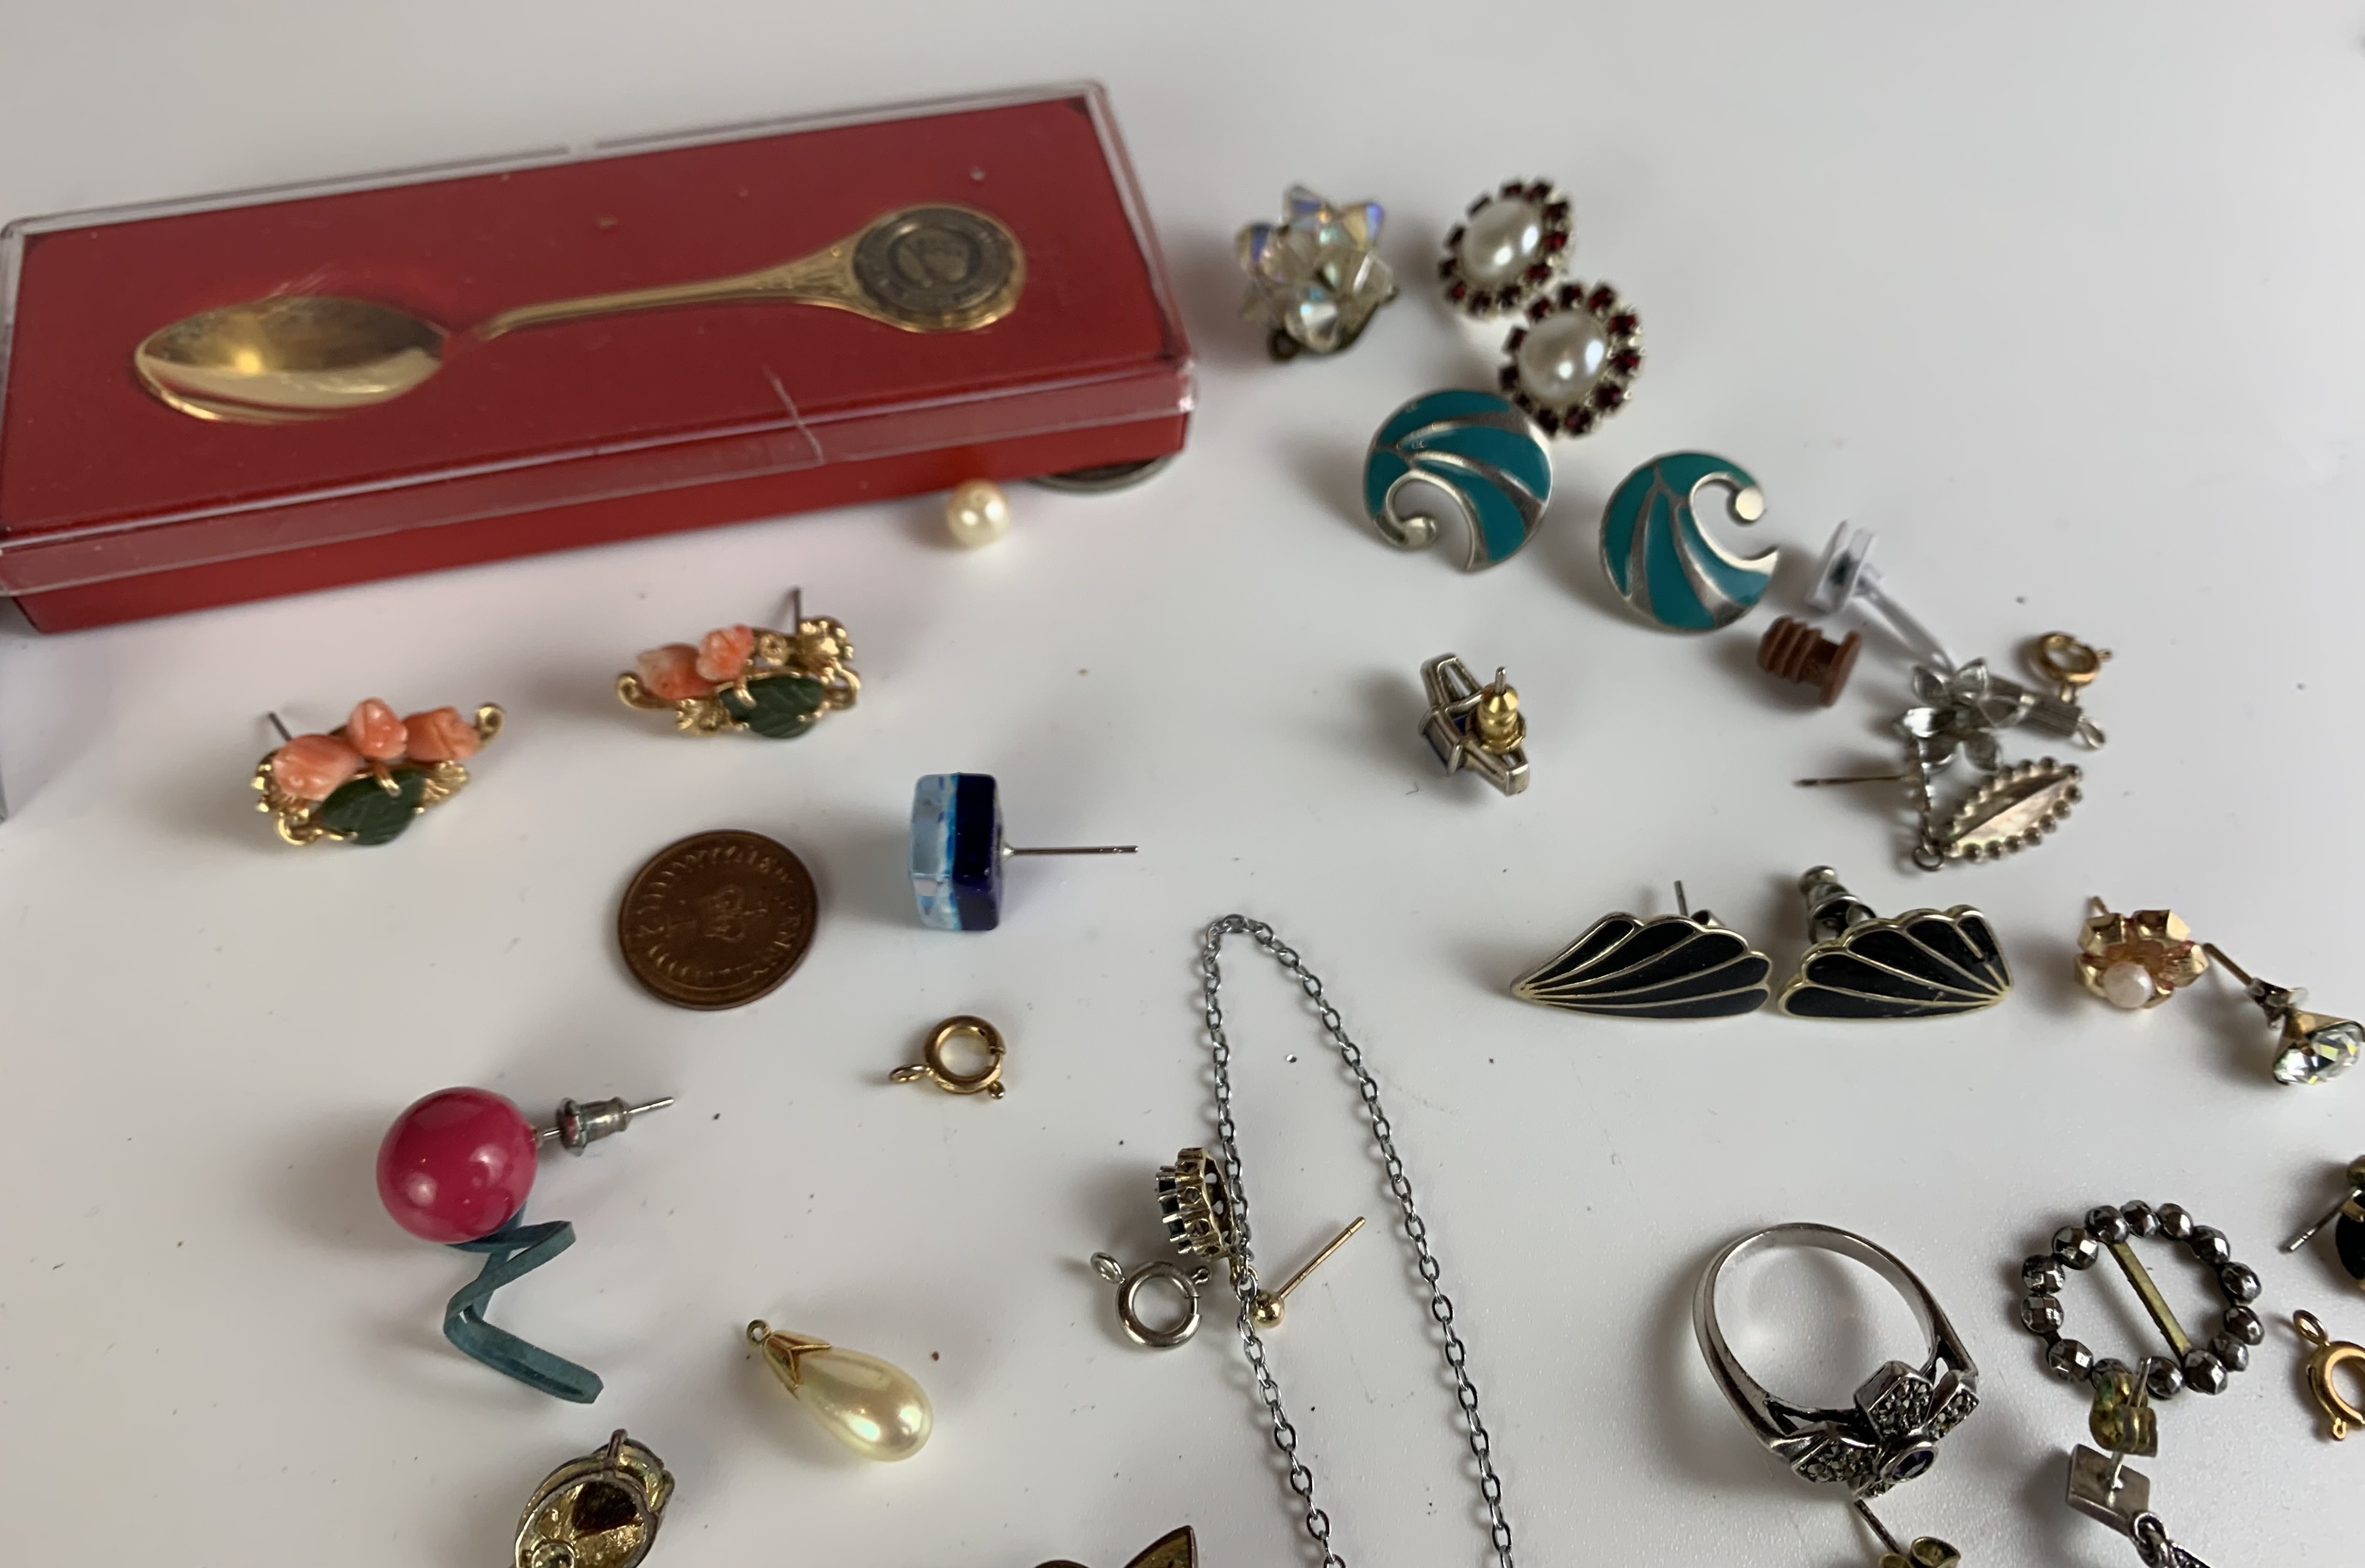 Dress jewellery including brooches, earrings, rings, souvenir spoon, odd coins and Azur watch - Image 8 of 9